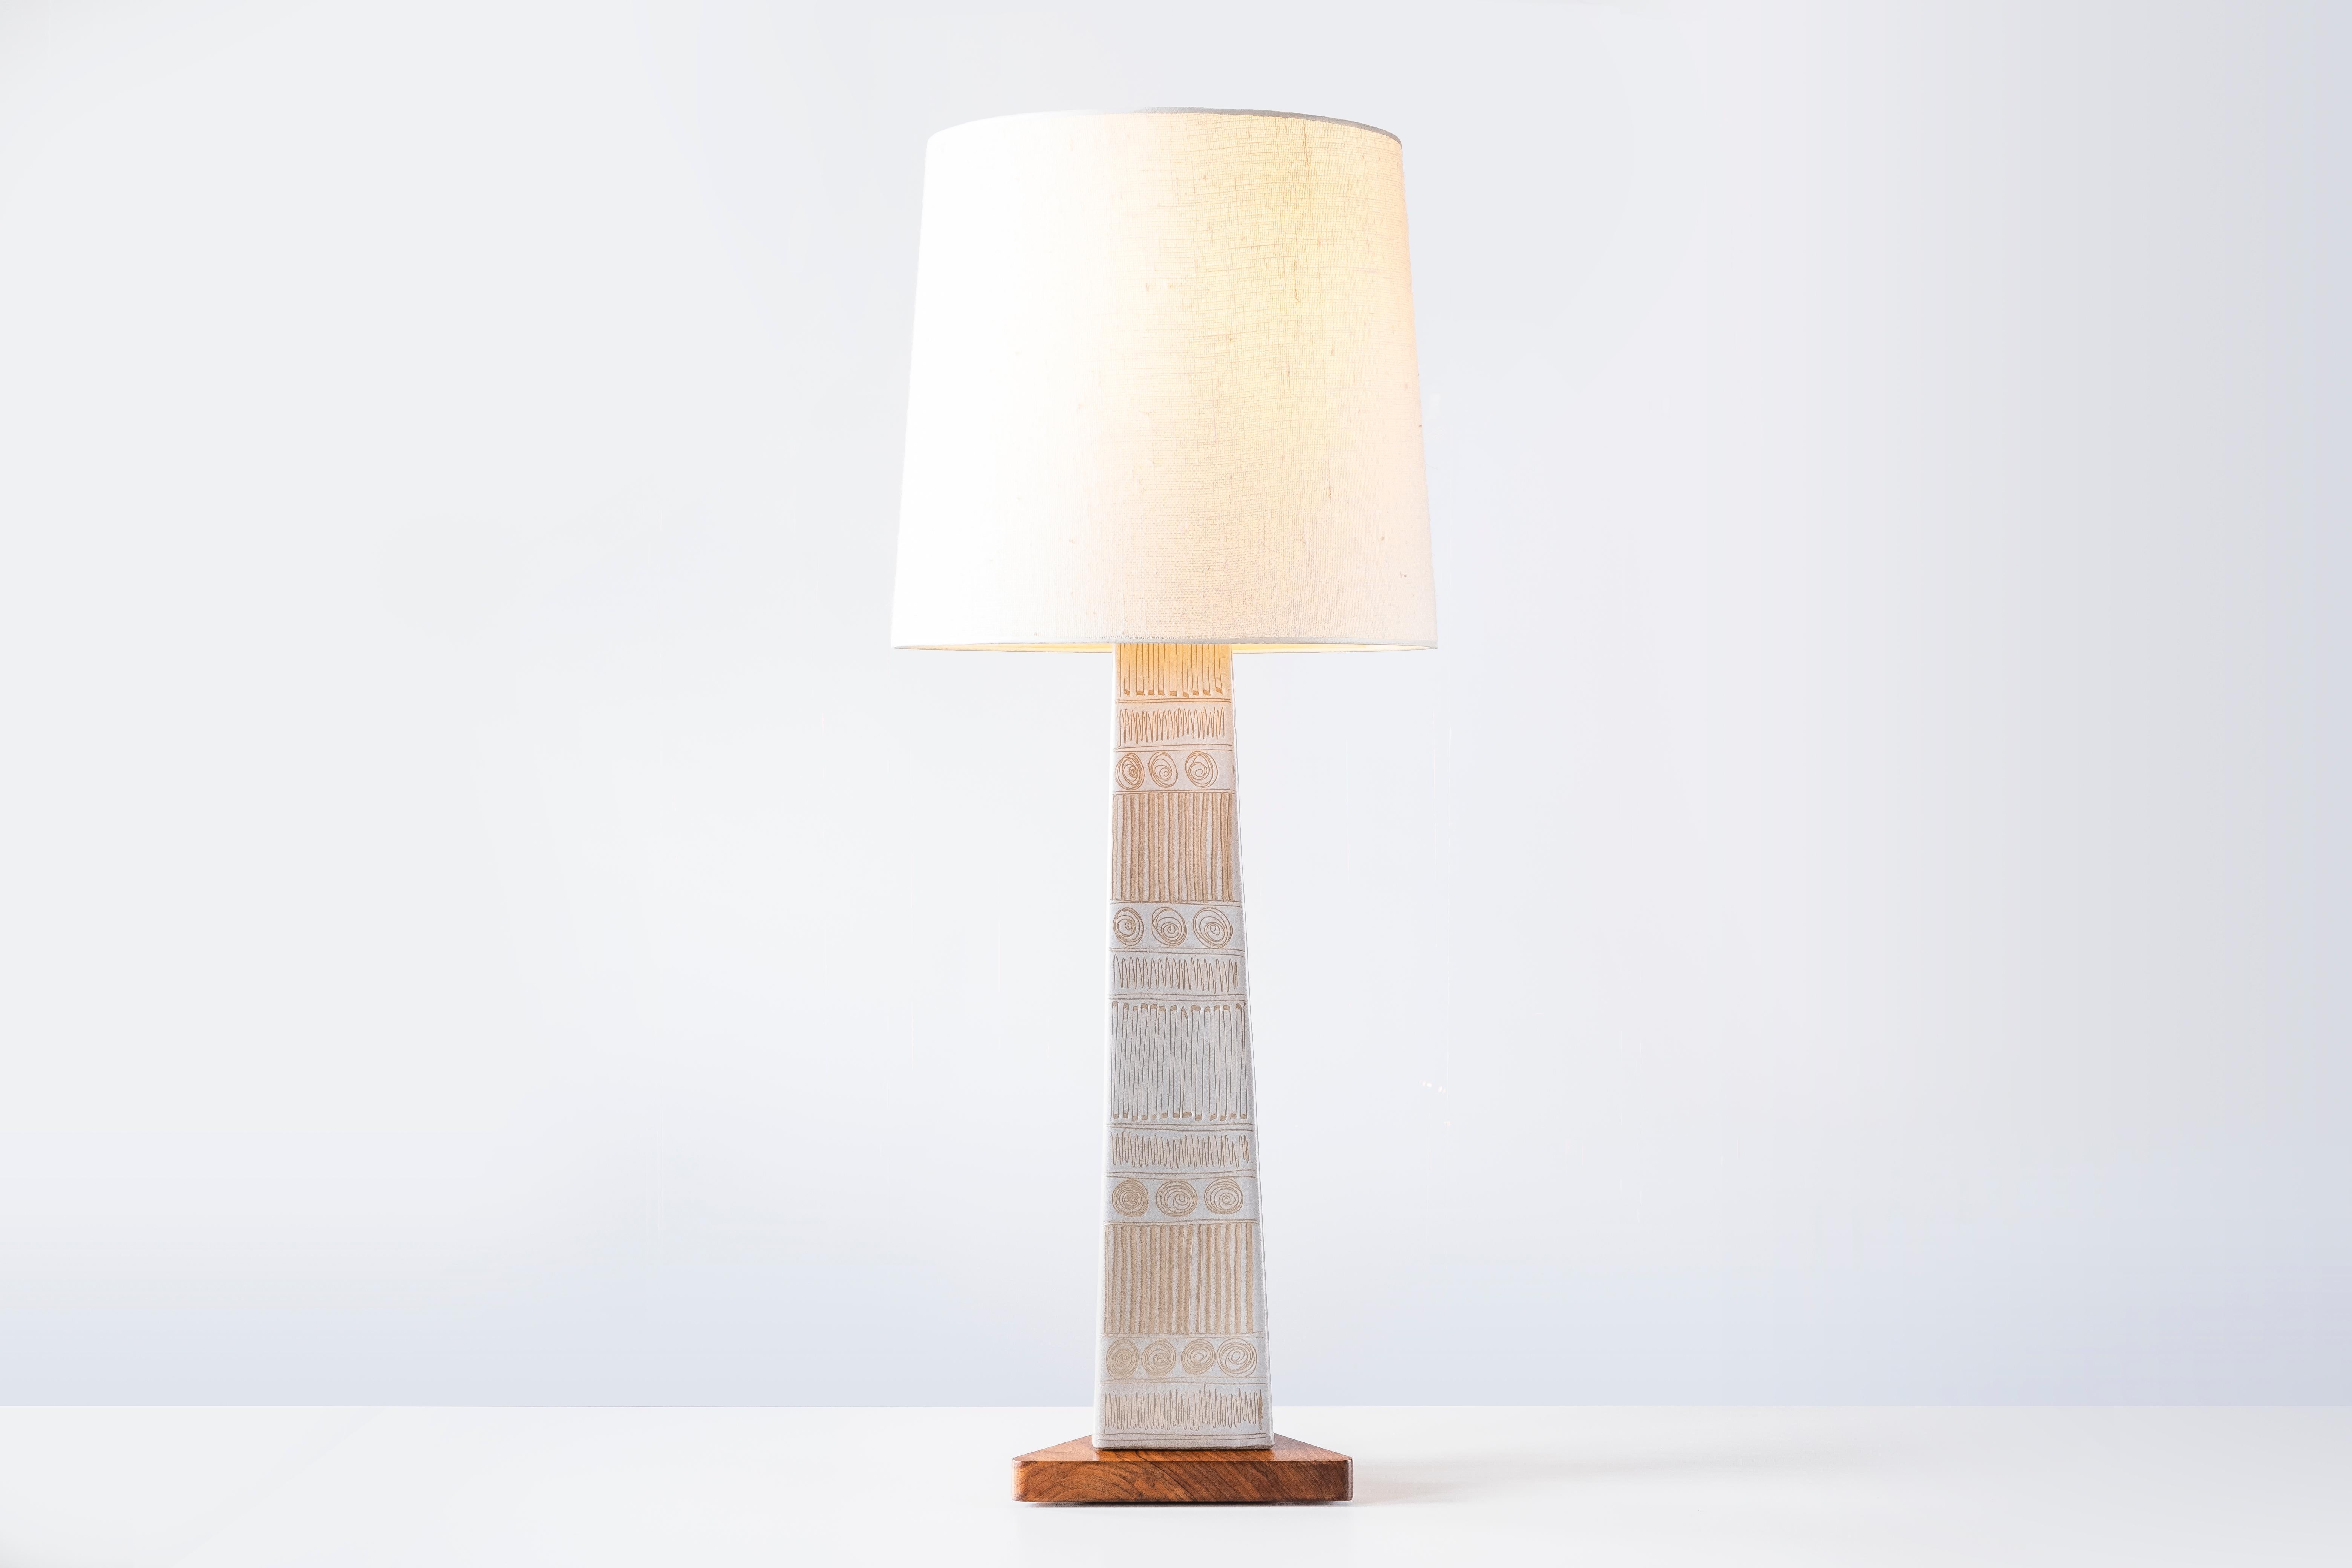 ?? WHAT'S INCLUDED?
—
This listing is for the lamps only. New shades, exactly matching the catalog dimensions can be purchased upon request.


?? WHAT IS IT?
—
This absolutely gigantic Martz lamp comes in a white glaze with a variety of